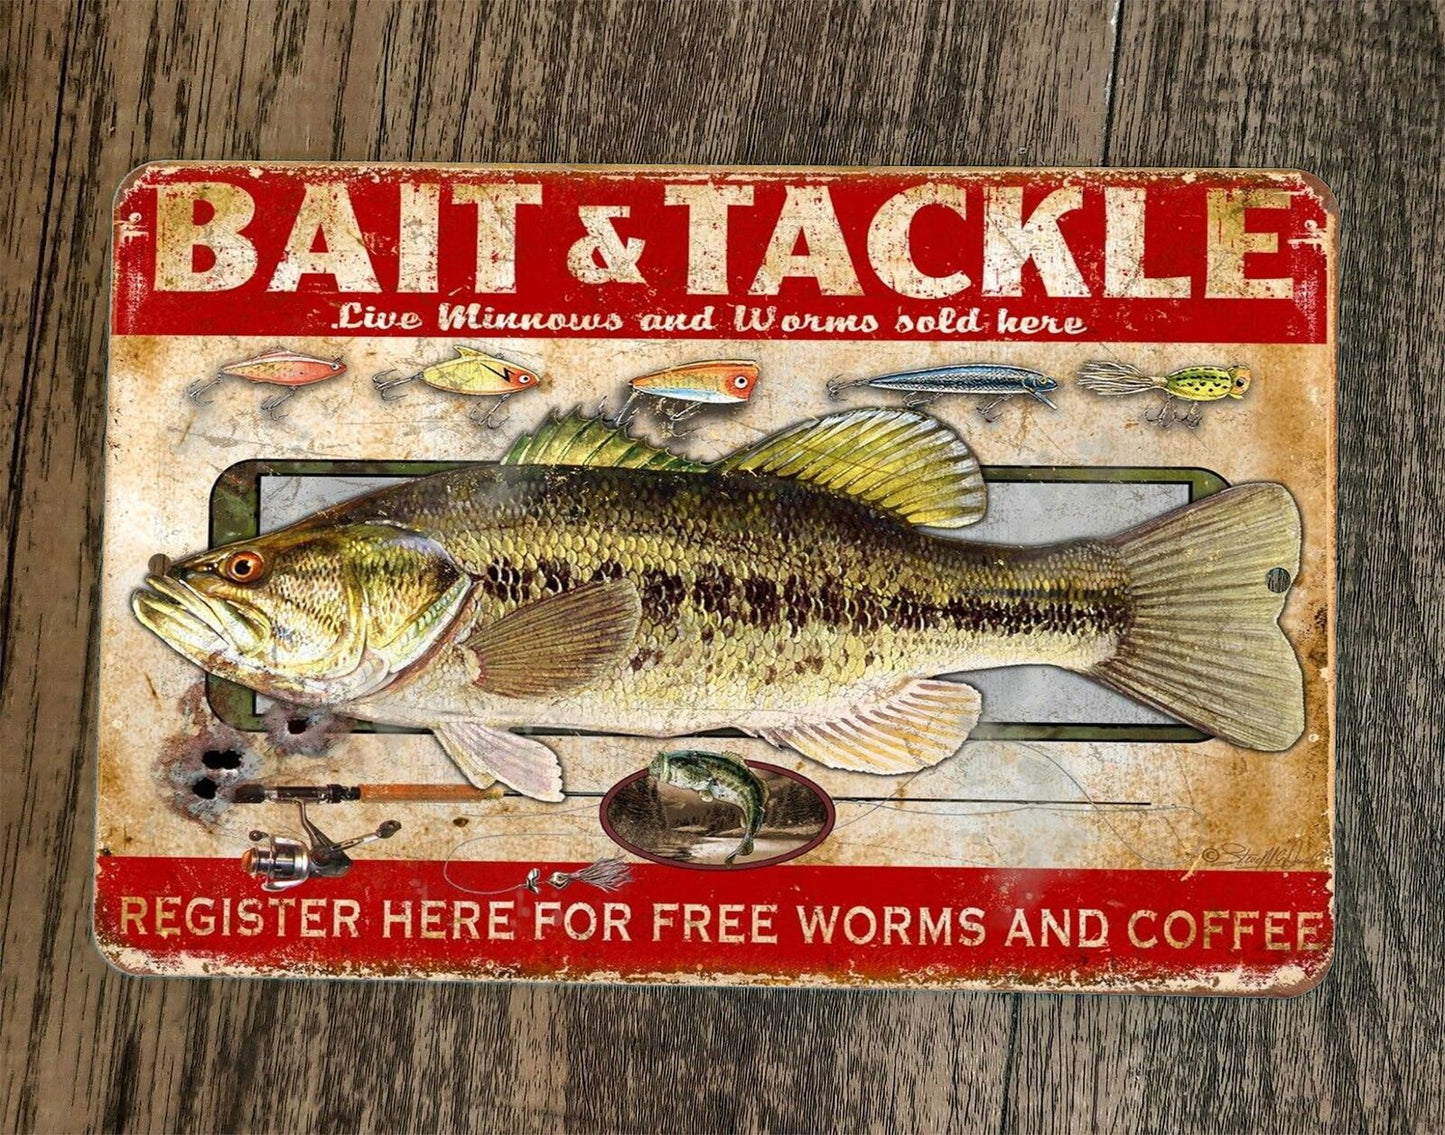 Bait And Tackle Live Minnows And Worms 8x12 Metal Wall Sign, 52% OFF